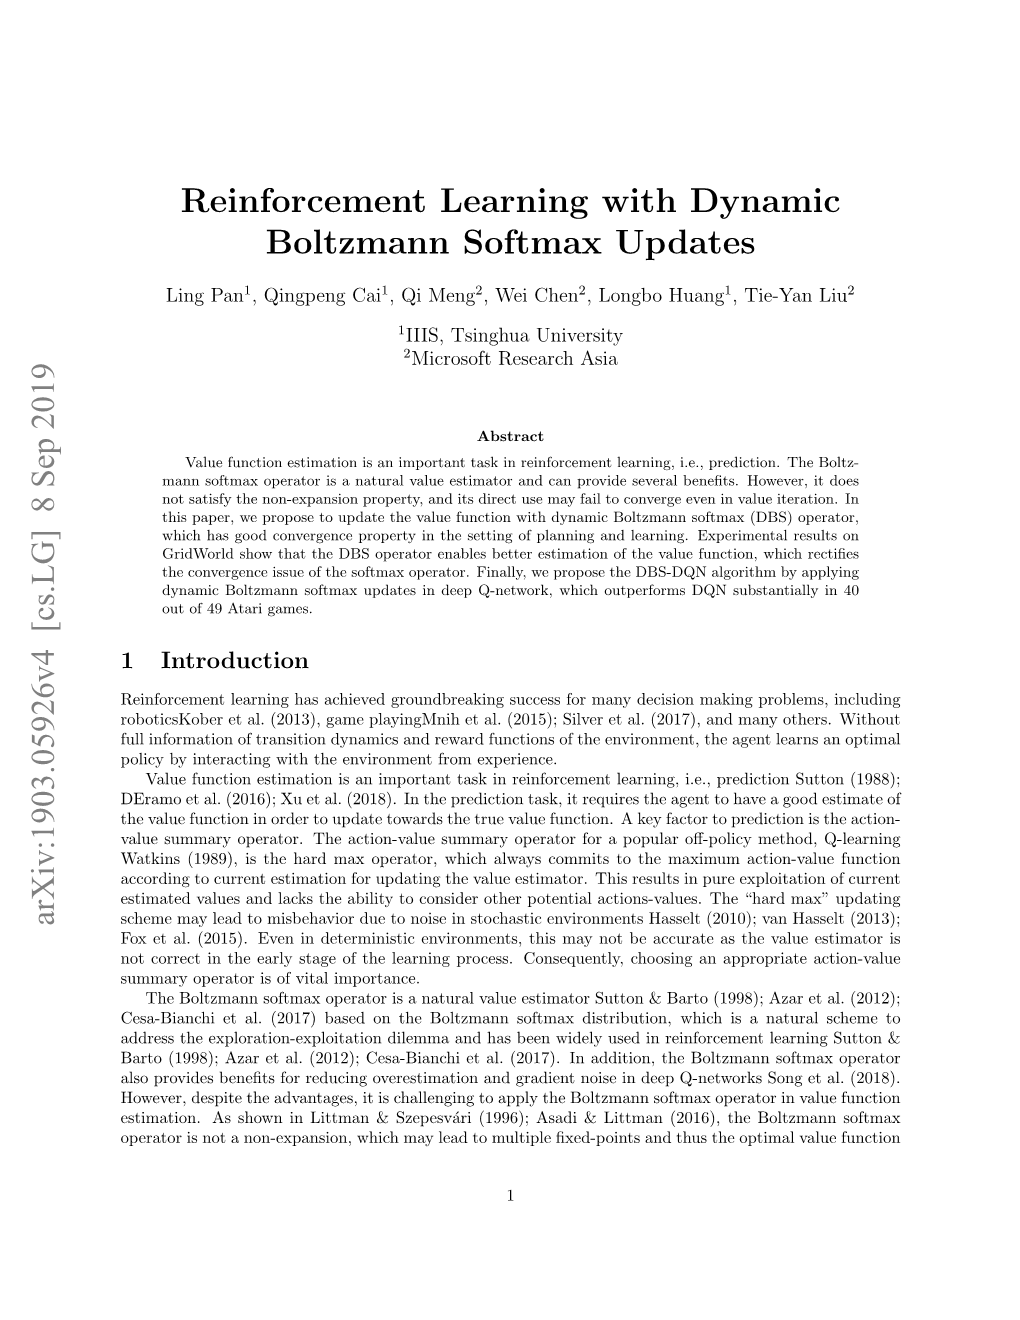 Reinforcement Learning with Dynamic Boltzmann Softmax Updates Arxiv